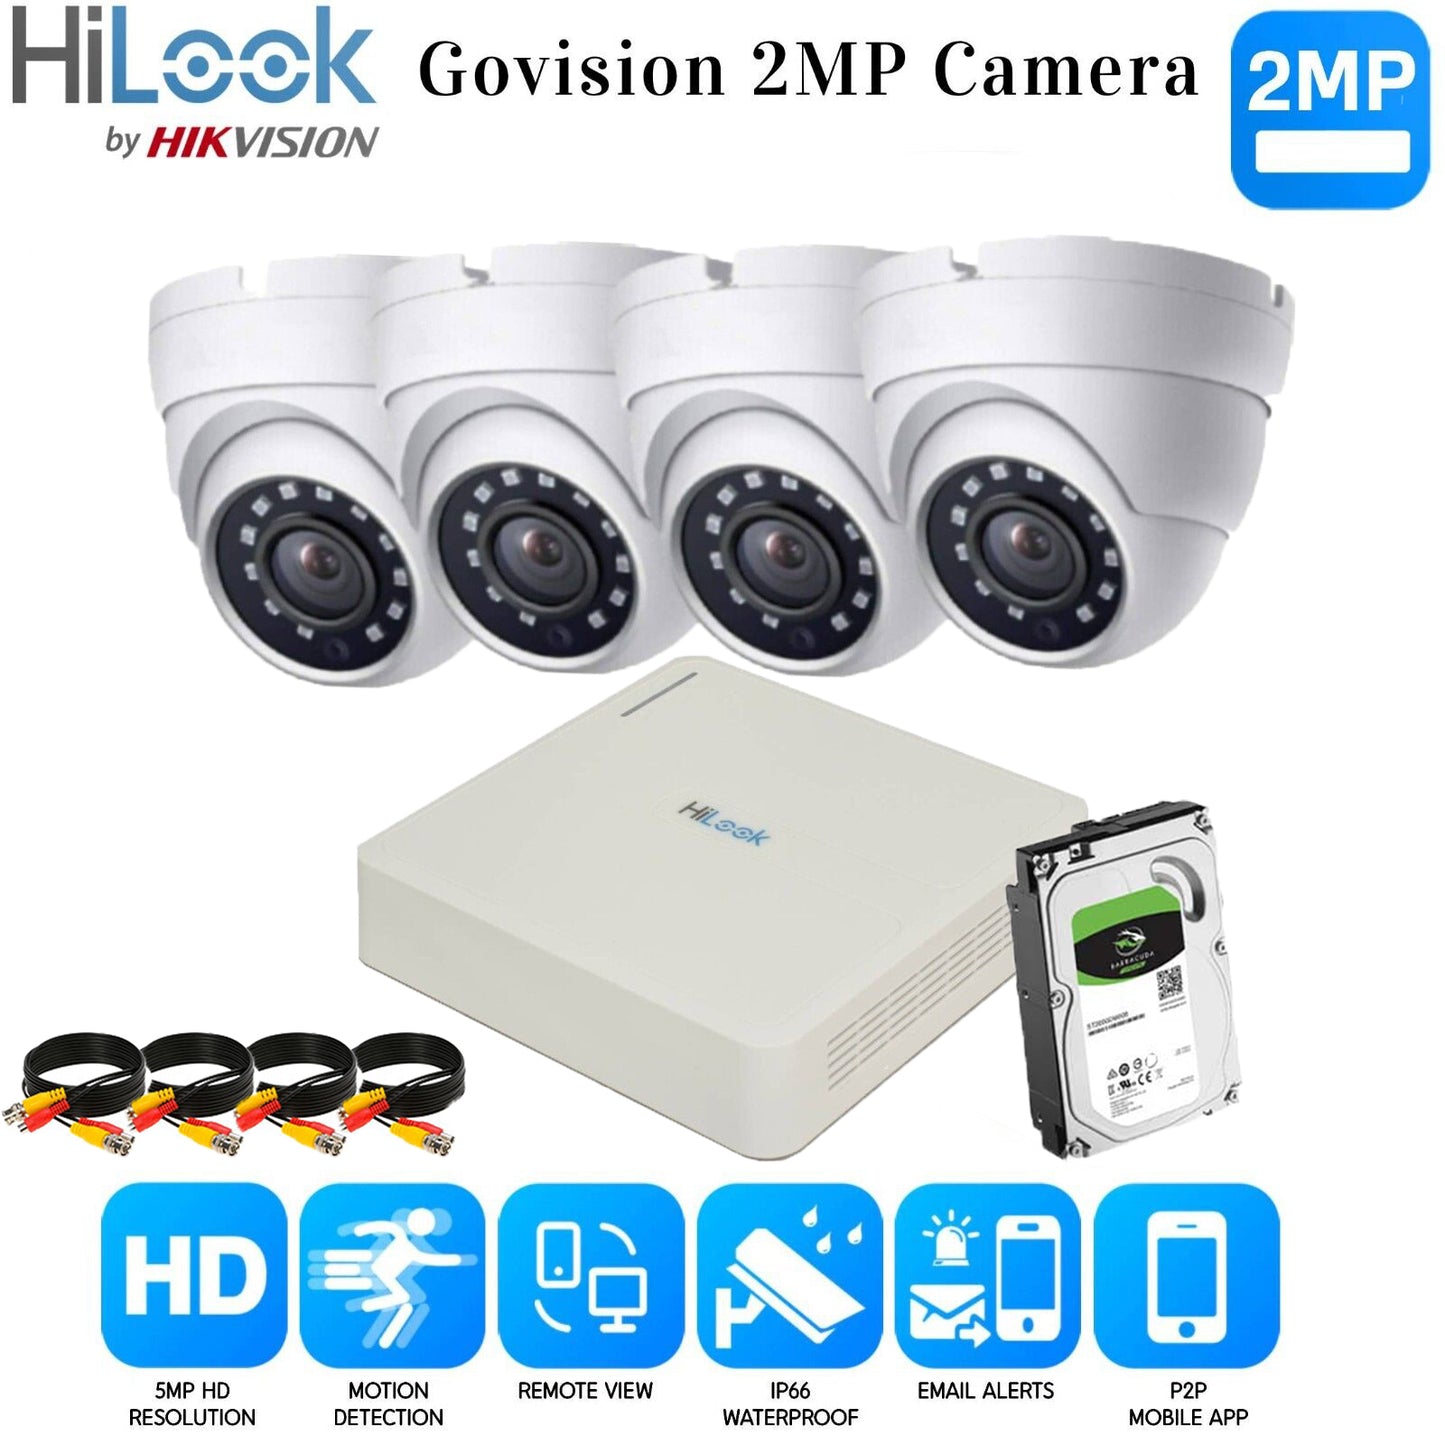 Hikvision Home Outdoor CCTV Security Camera System Kit HD 1080P 4CH DVR IR NIGHT 4CH DVR 4xCameras (white) 500GB HDD